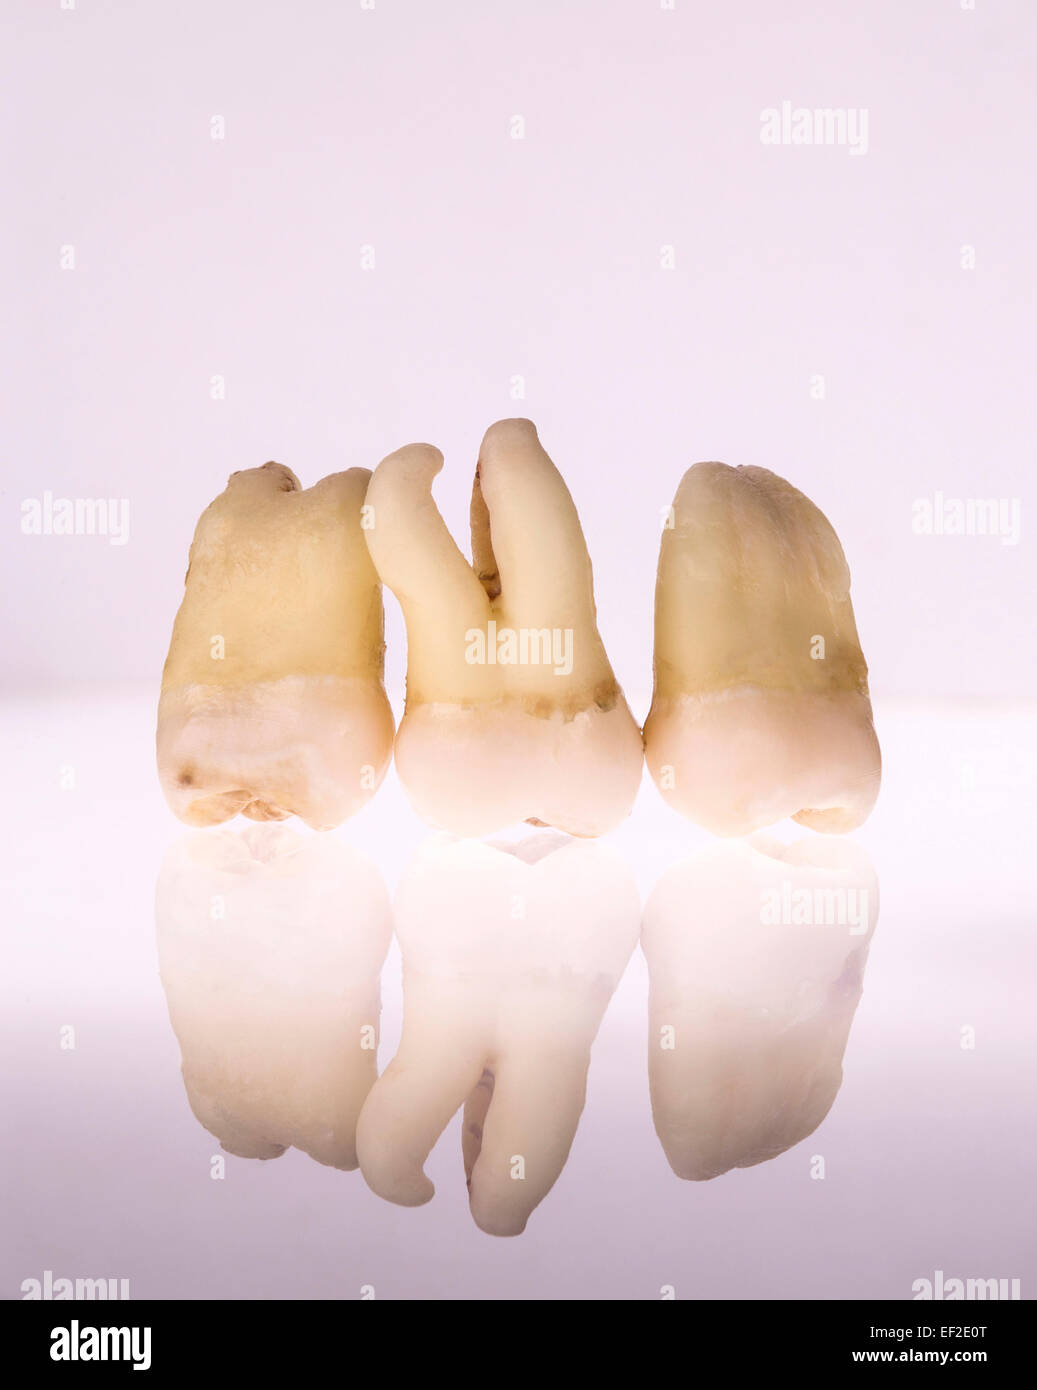 Group of extracted teeth with reflection below. Stock Photo